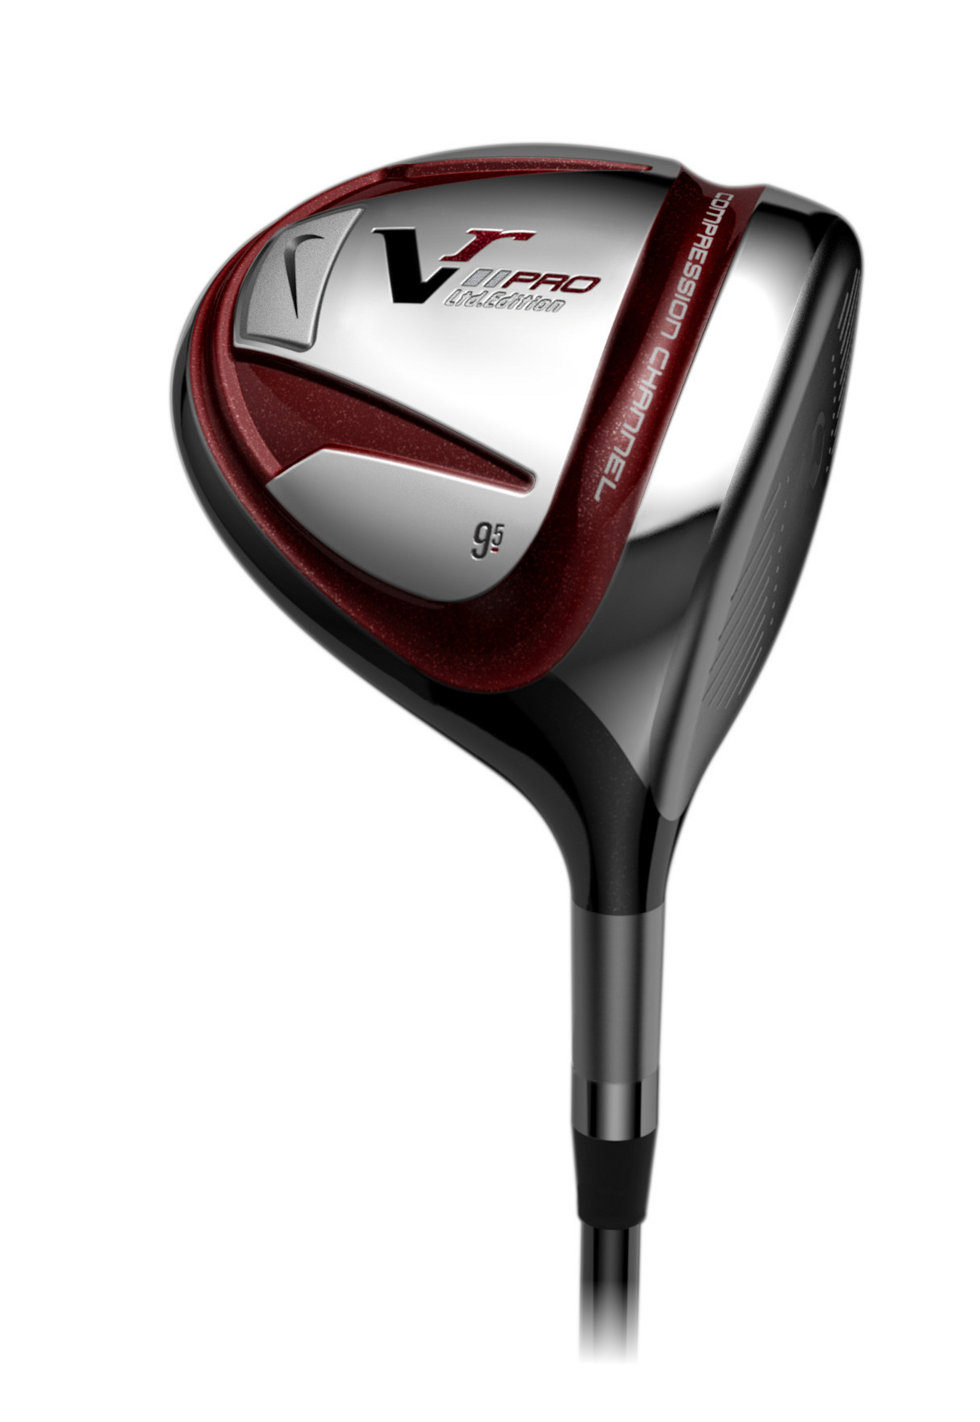 Nike VR Pro Limited Edition Driver